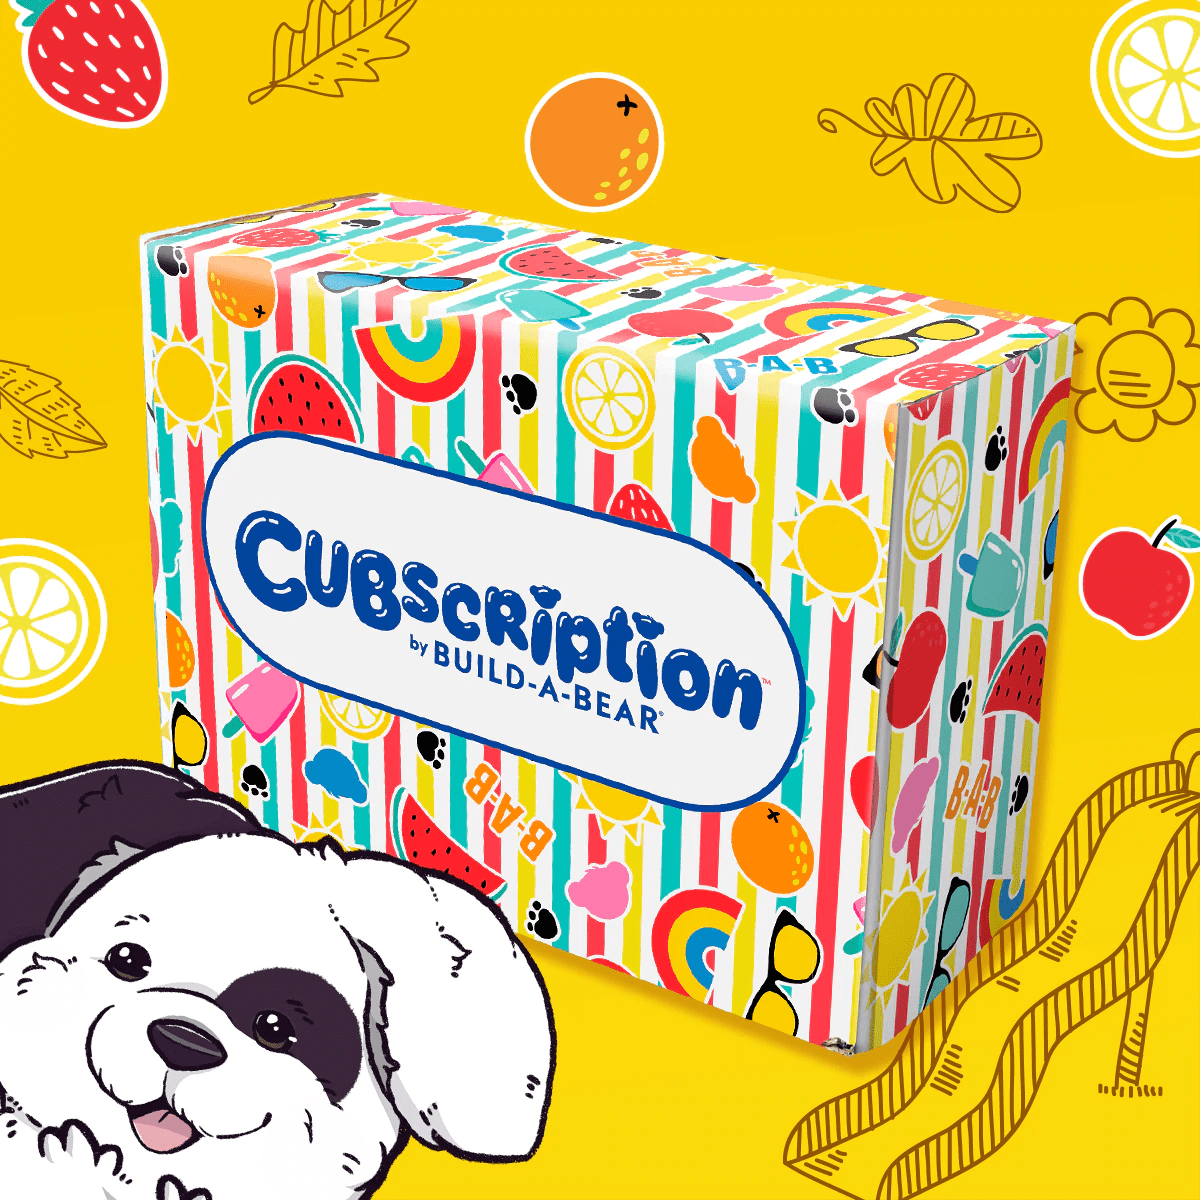 Cubscription Box by Build-A-Bear Spring 2022 Spoilers